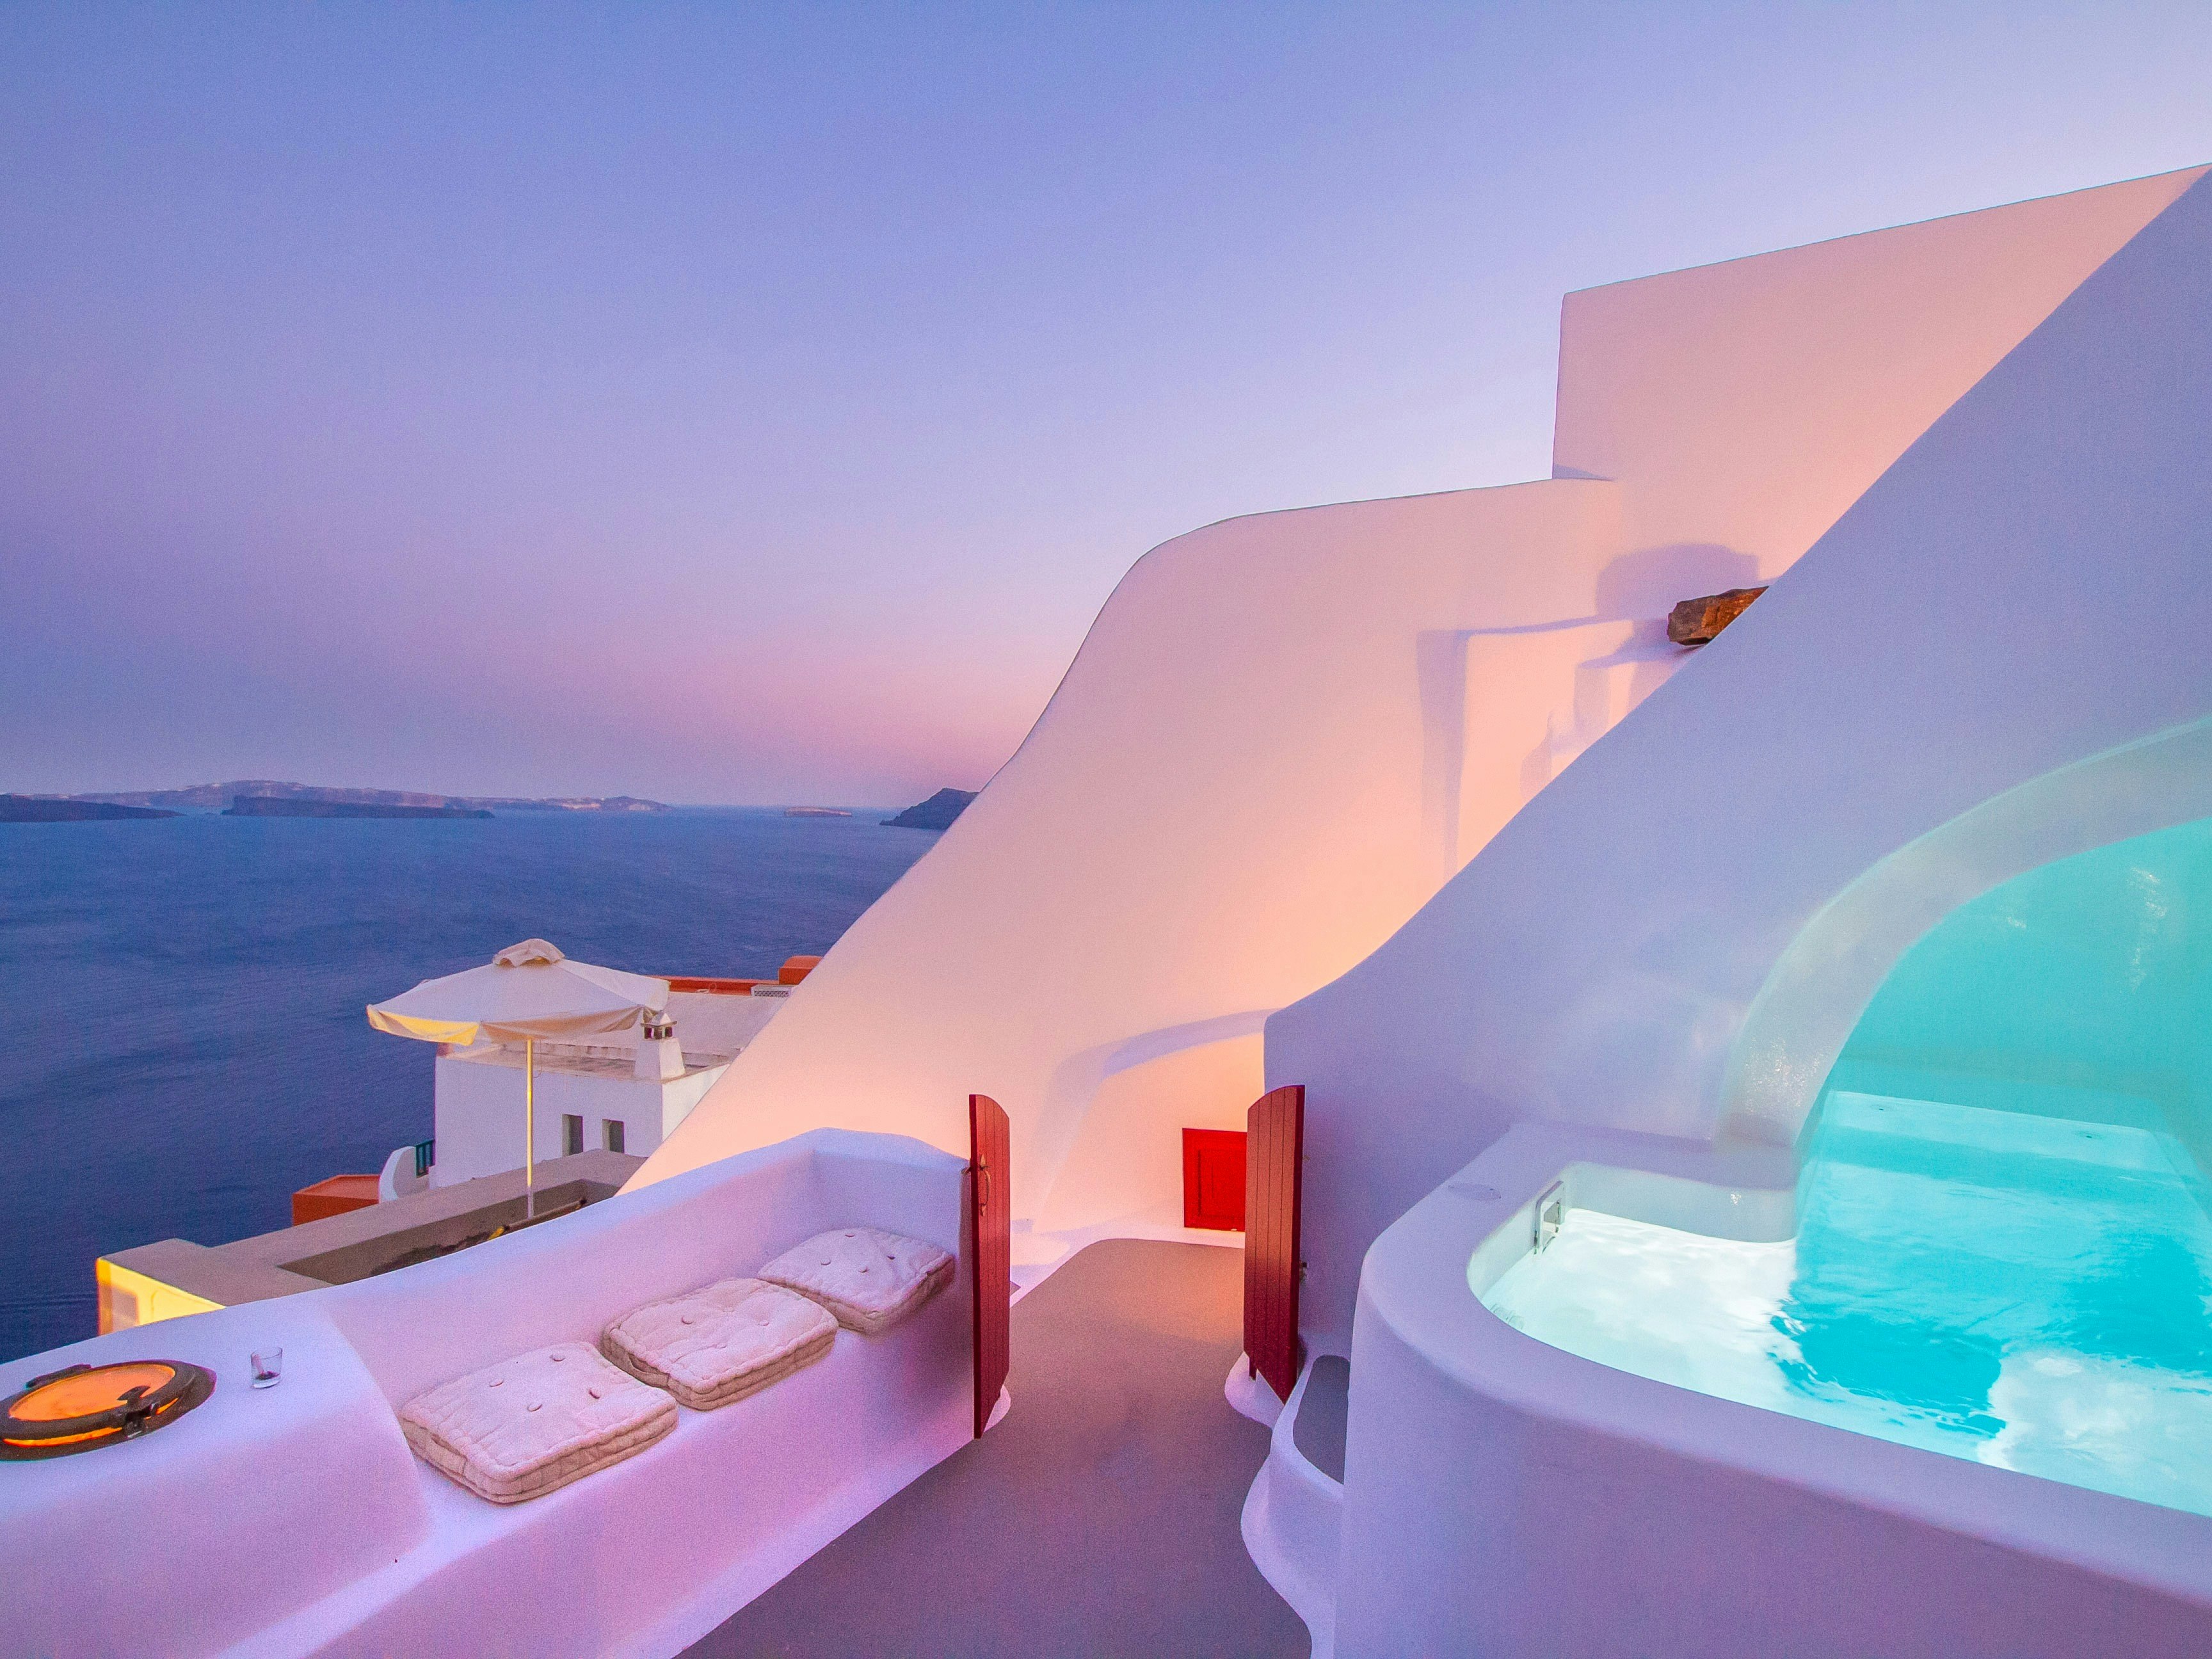 A picture of the house in Santorini with its typical white colour